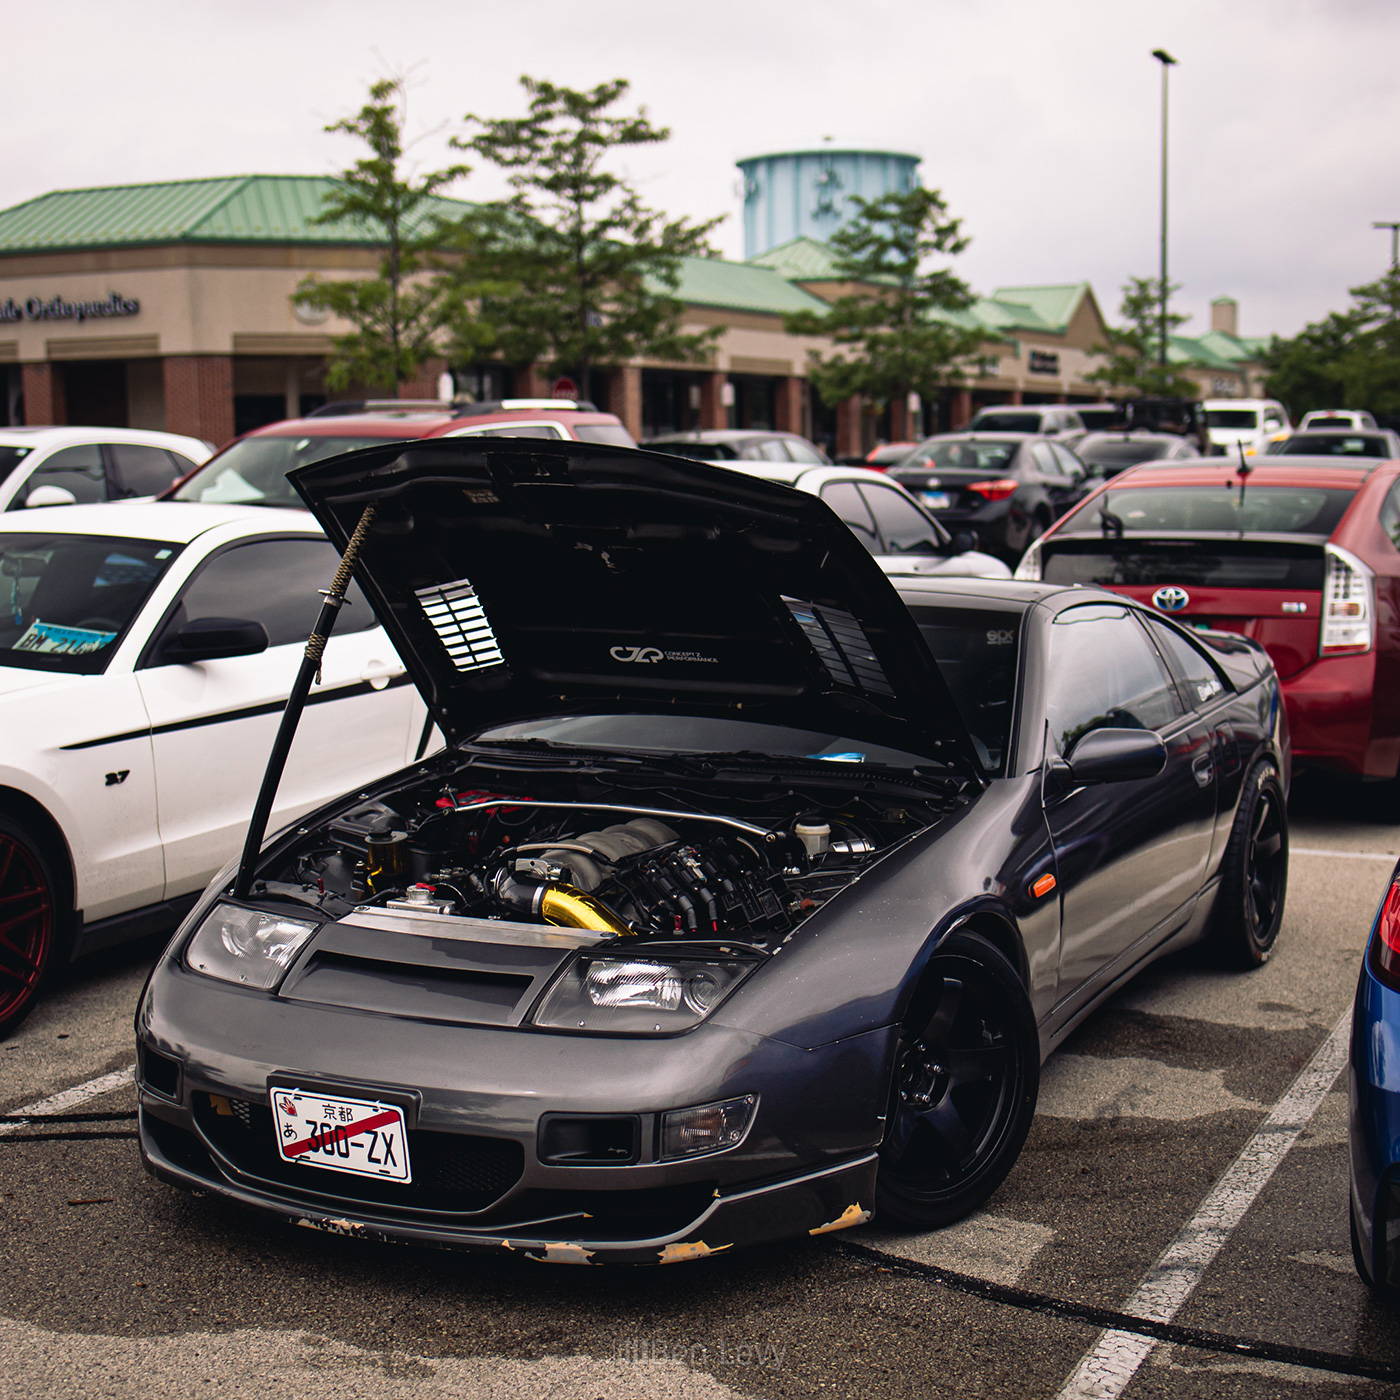 LS 300ZX at Cold Brewed Cars and Coffee